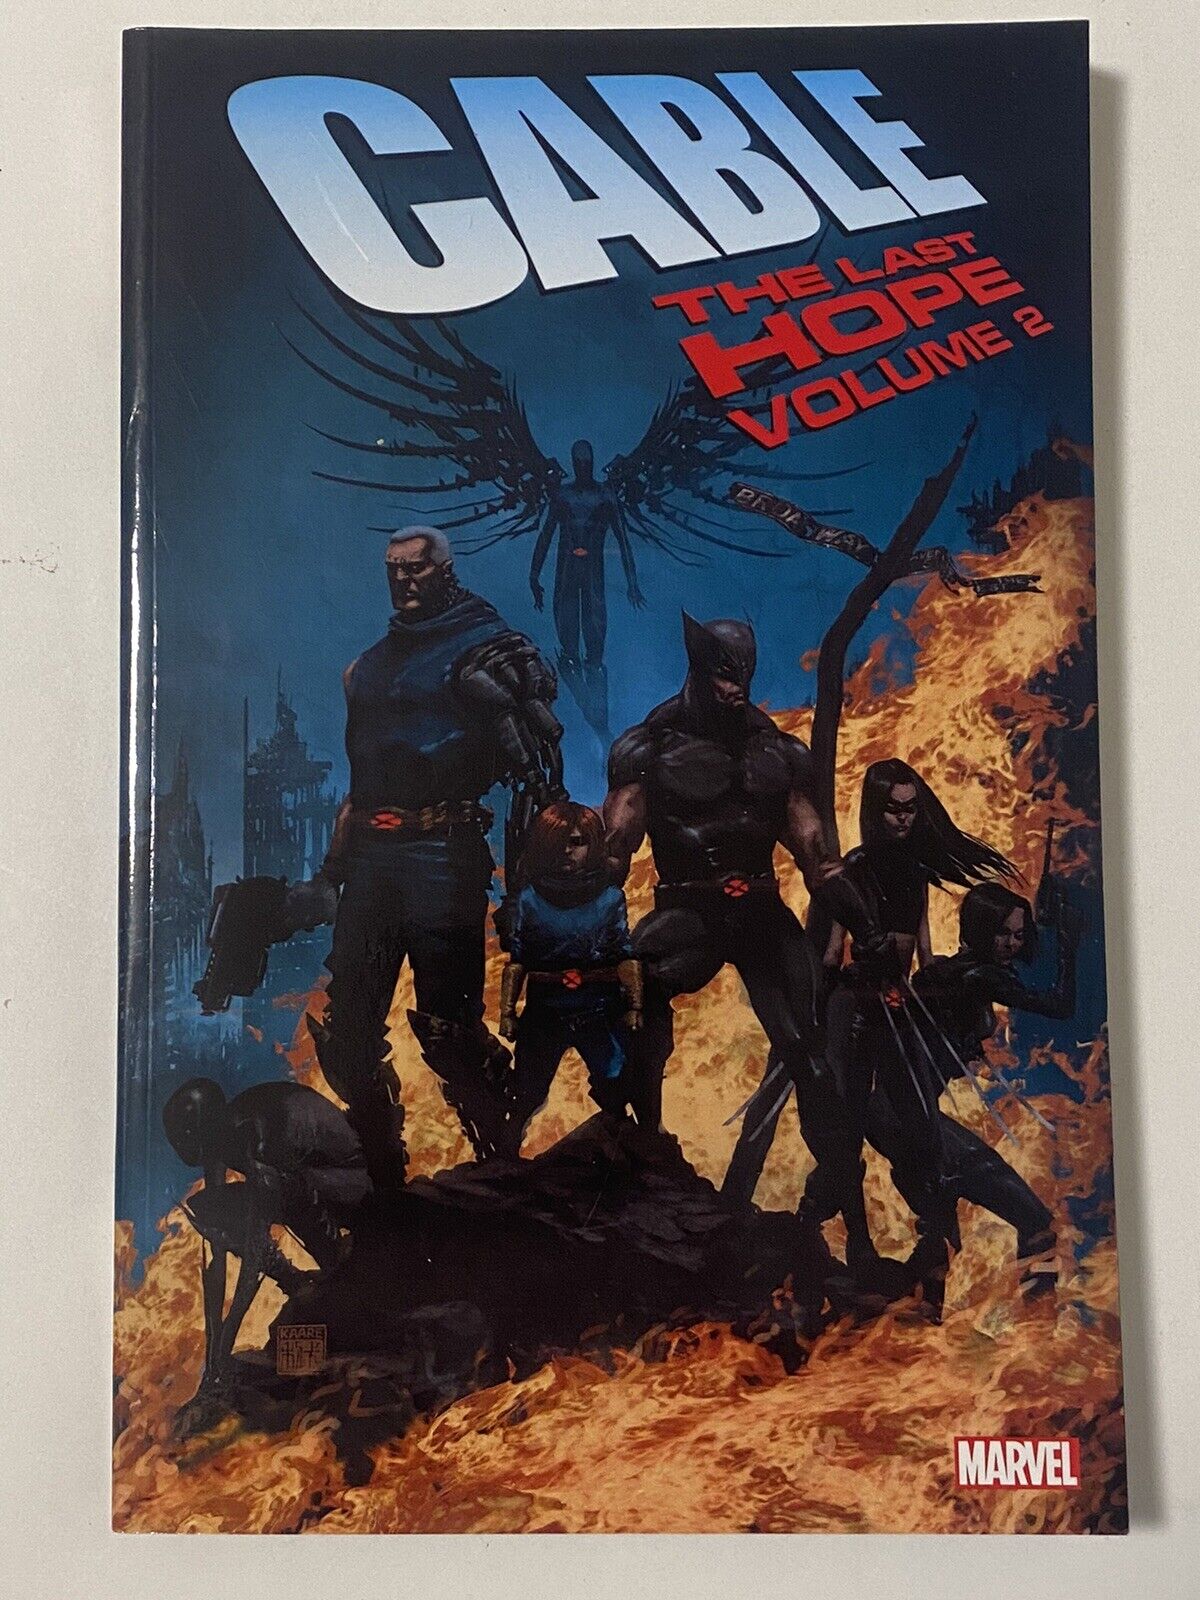 MARVEL CABLE the Last Hope Vol. 2 New 